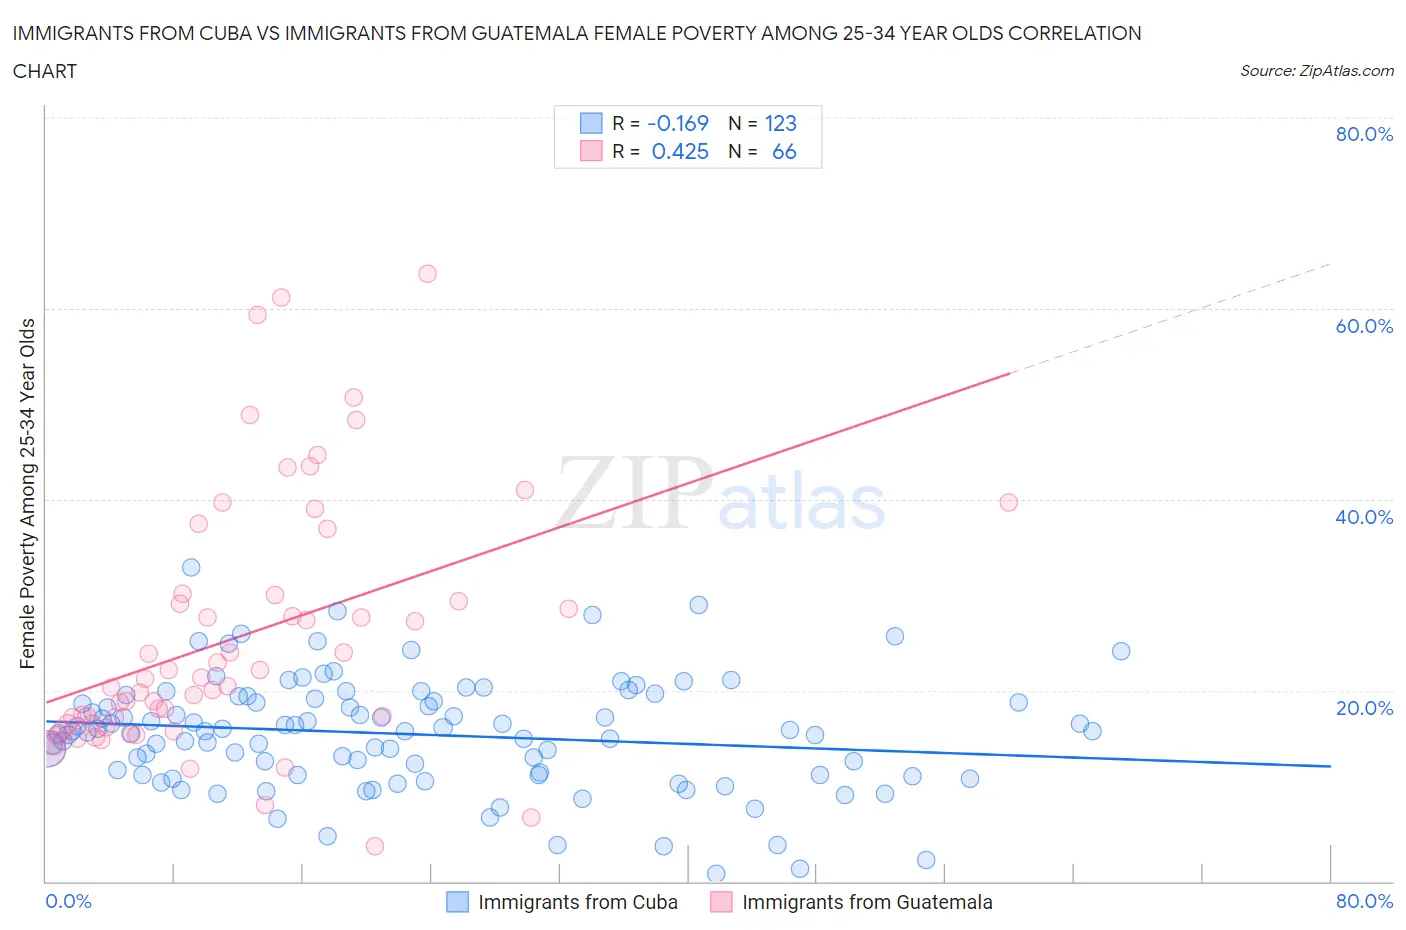 Immigrants from Cuba vs Immigrants from Guatemala Female Poverty Among 25-34 Year Olds